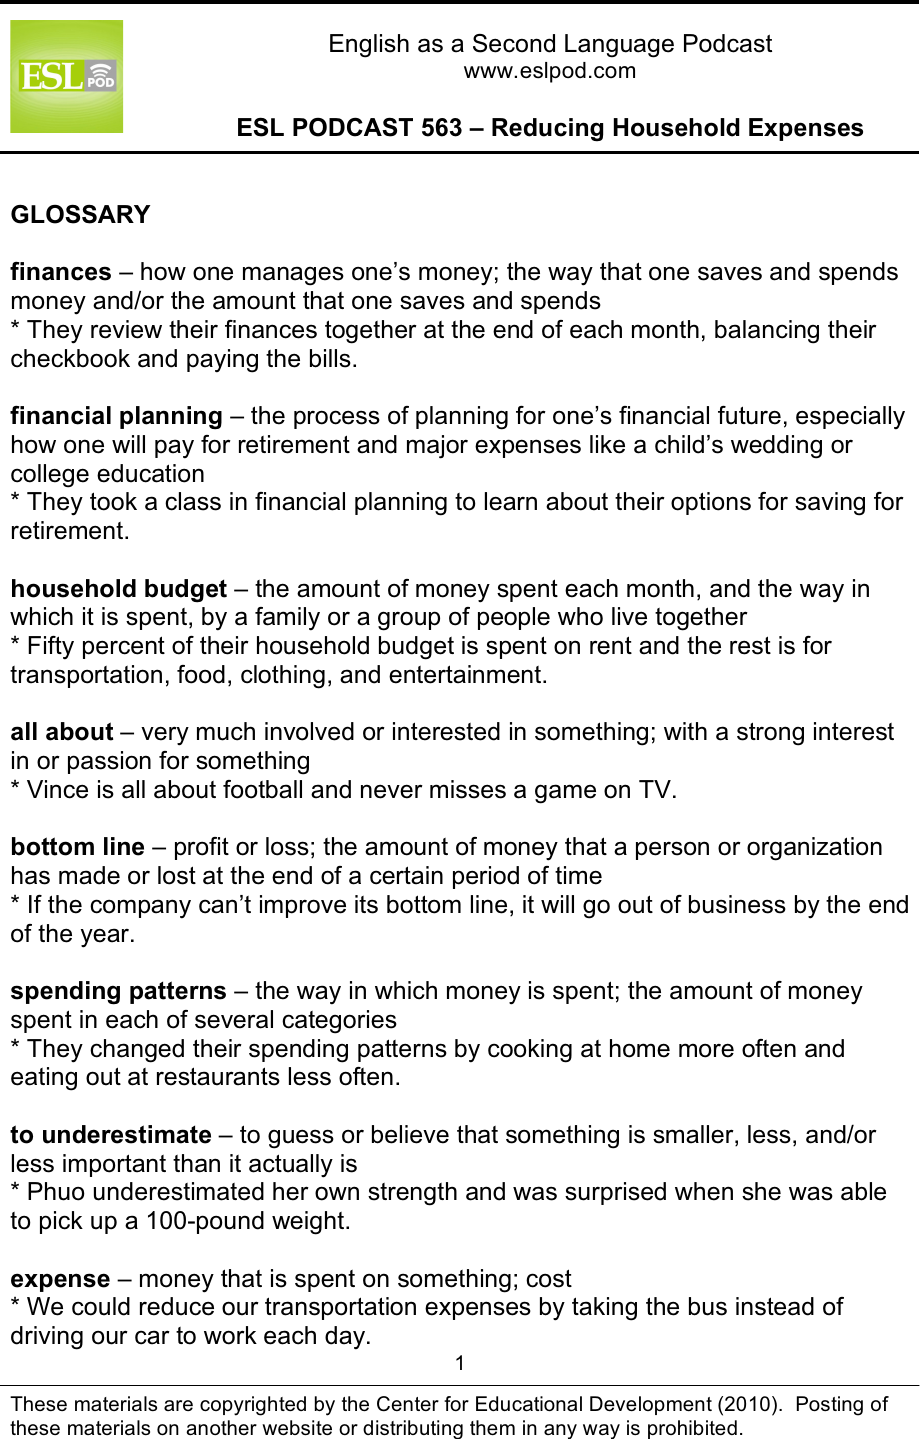 Page 1 of 9 - L_ESLPod_563_Guide ESLPod 563 Guide - Reducing Household Expenses